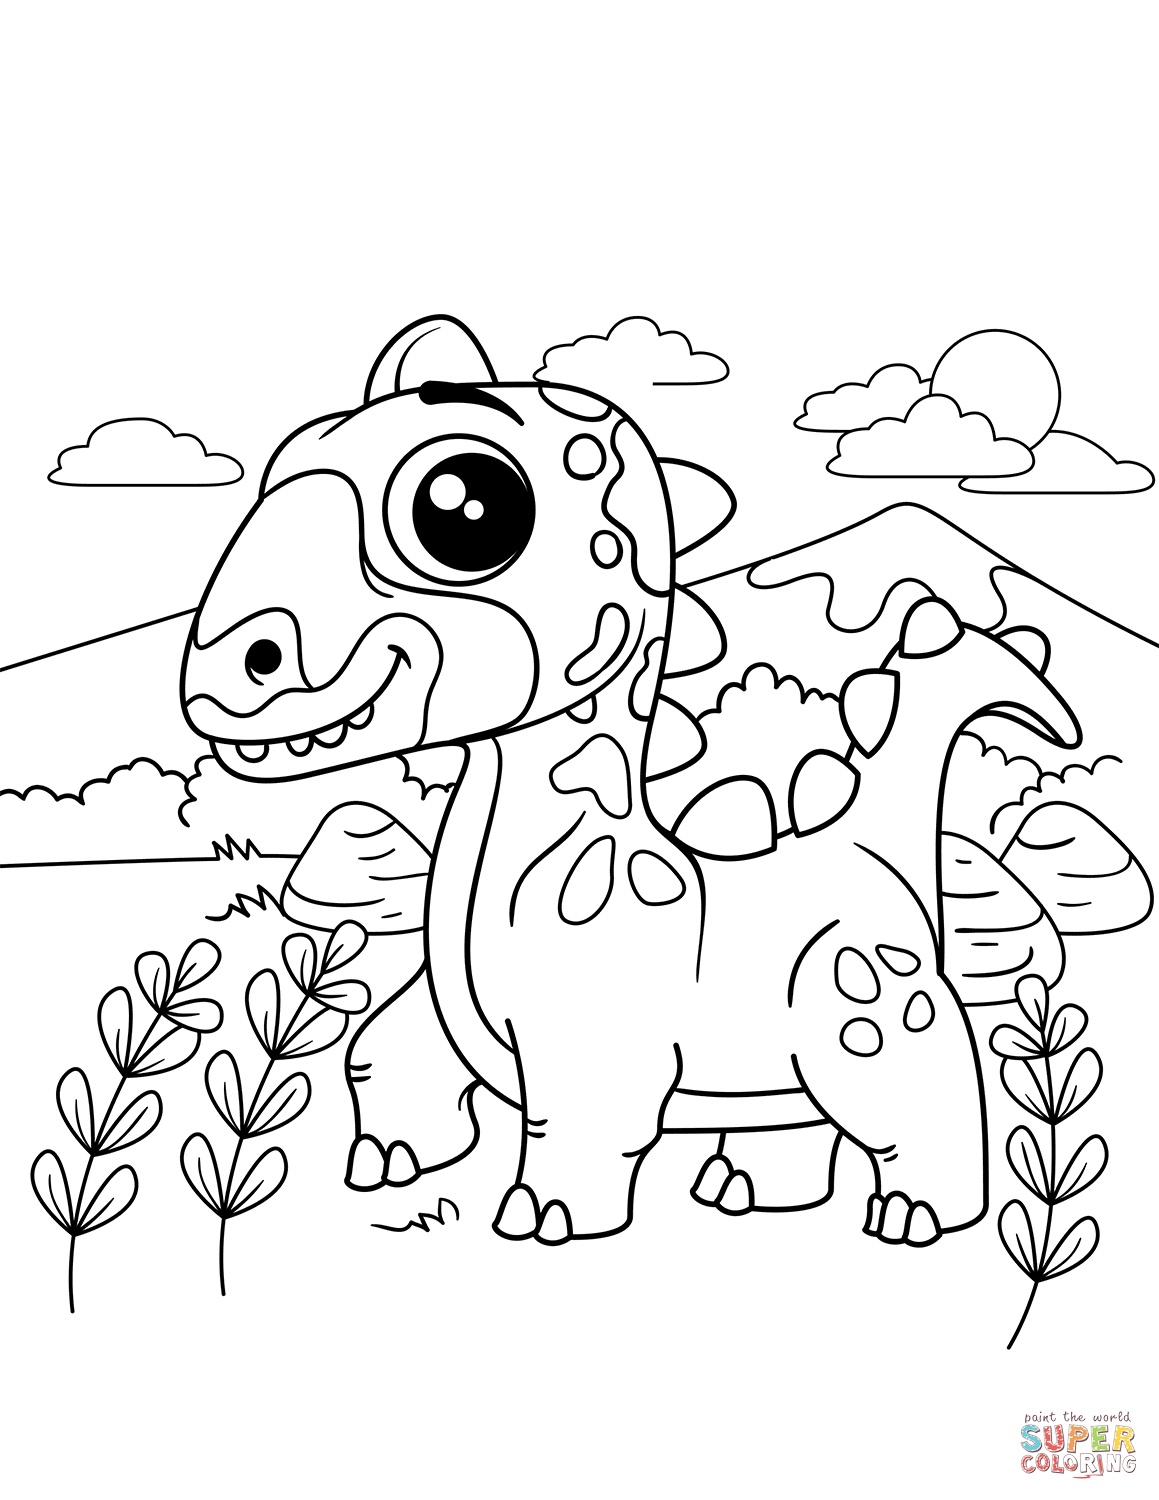 Easy Dinosaur Coloring Pages at GetColorings.com | Free printable